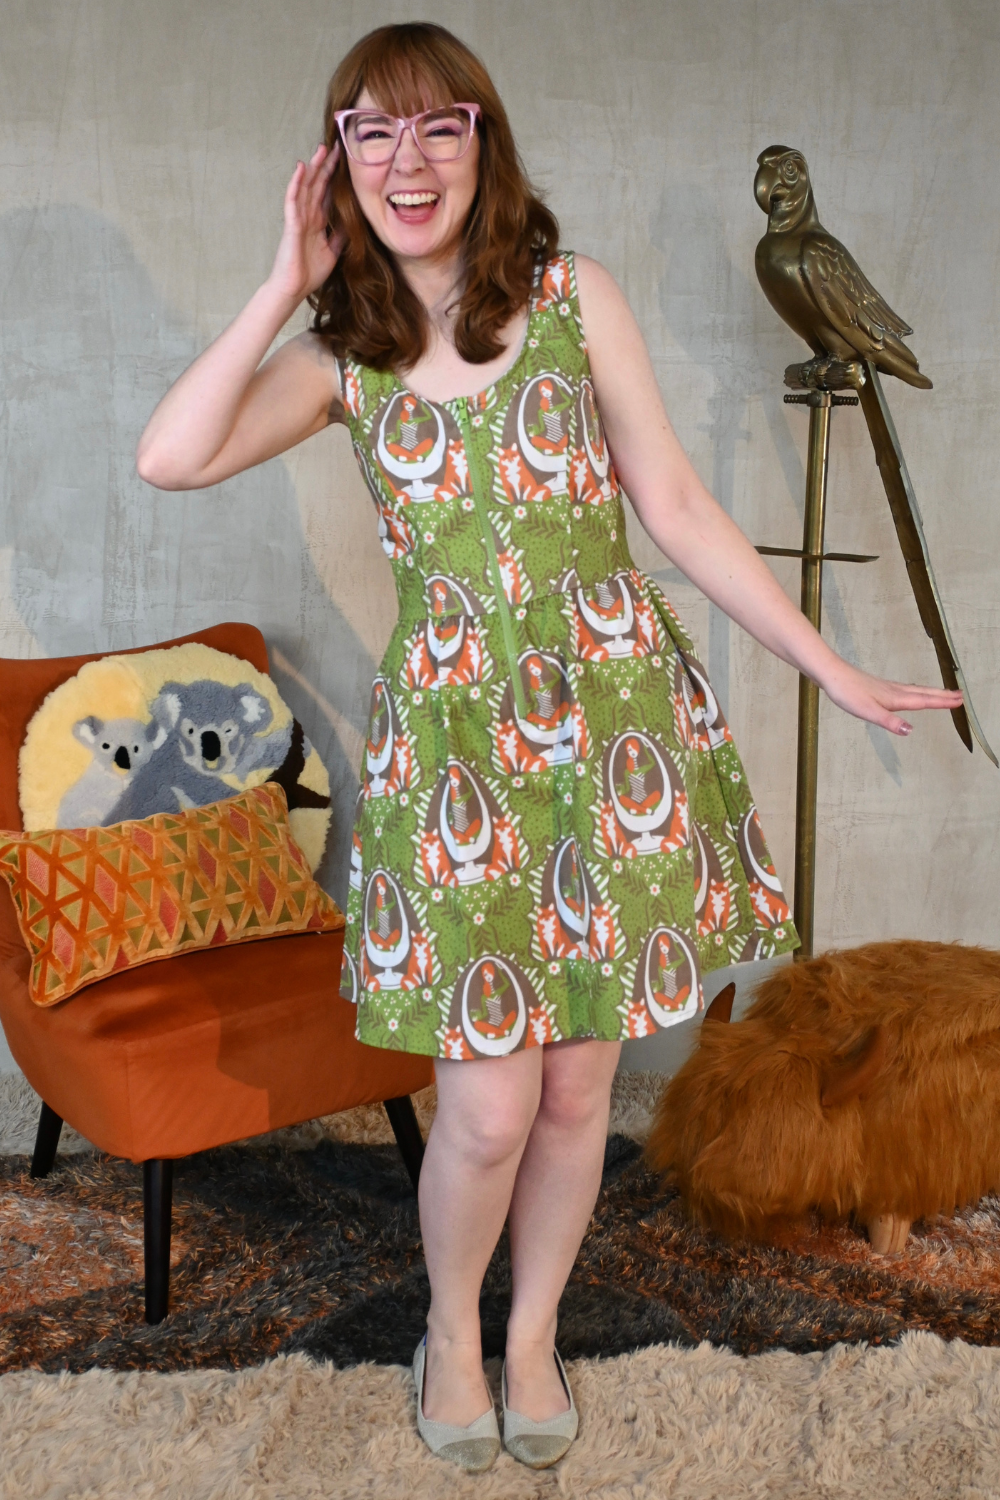 Brown-haired model with pink glasses posing in olive green fox and girl print zip-front knee length dress